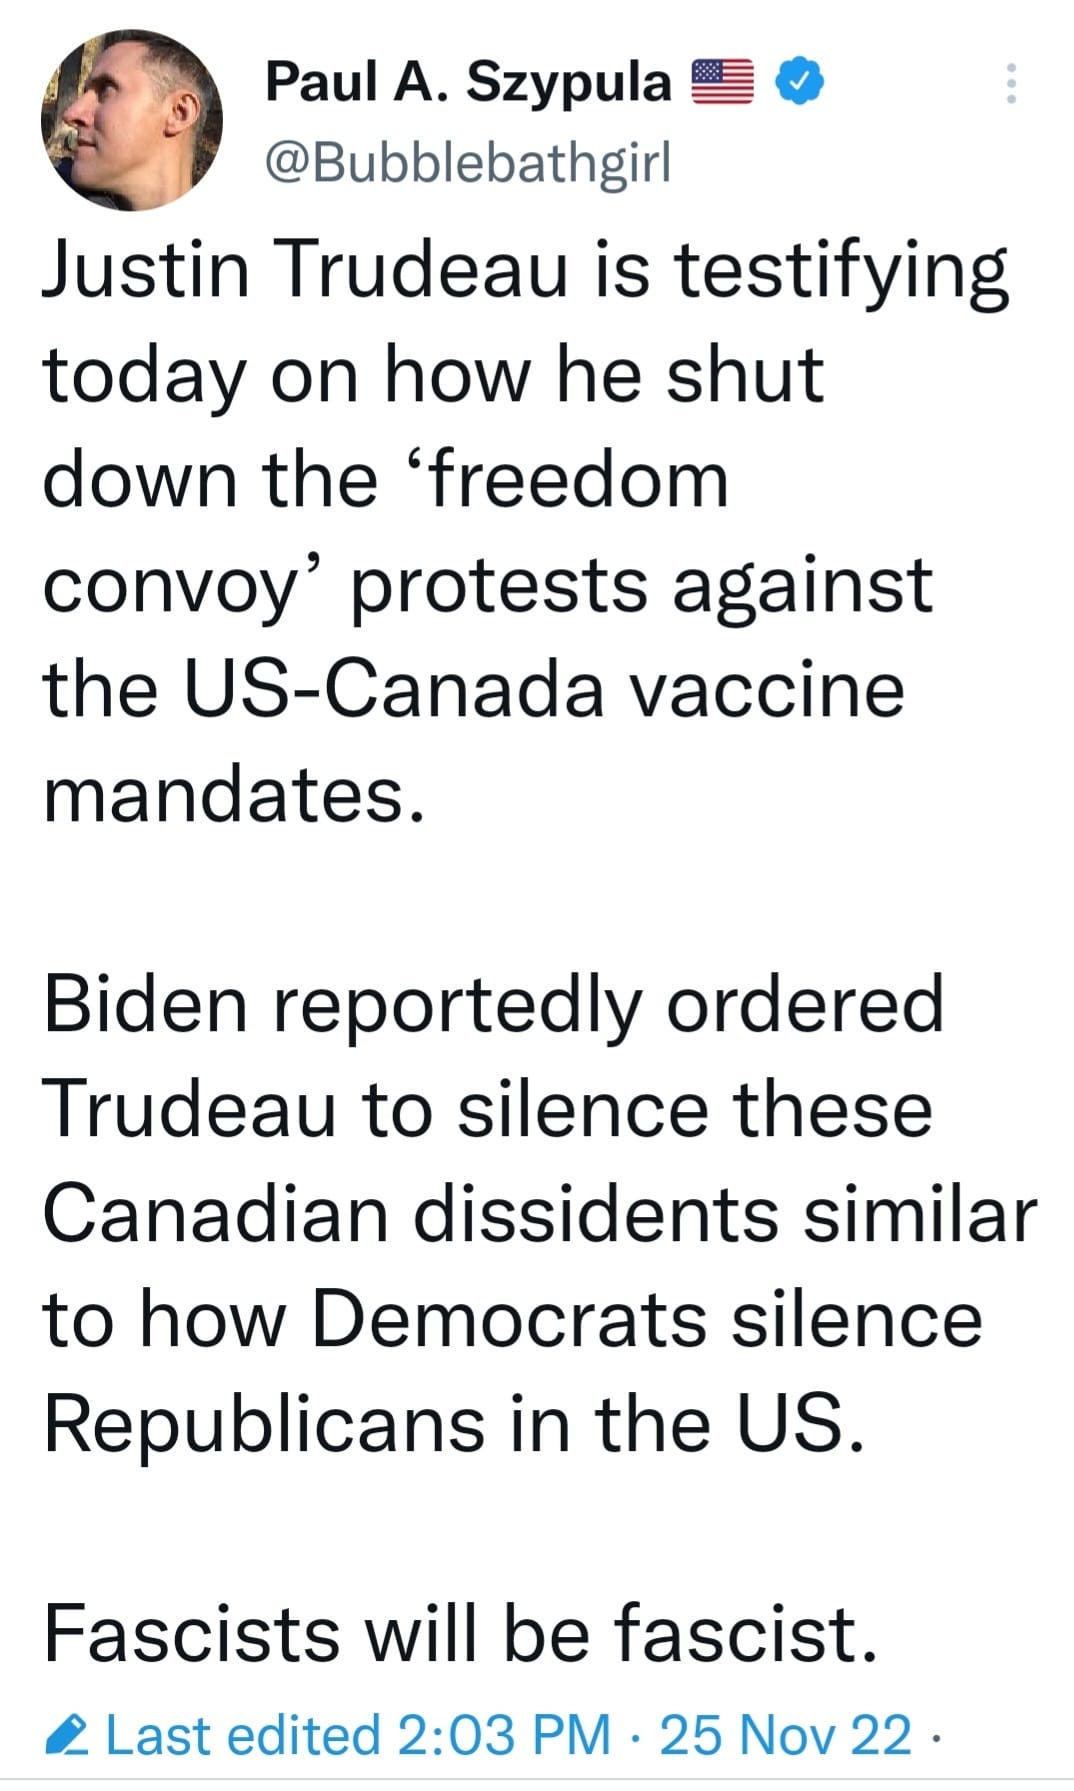 May be an image of 1 person and text that says 'Paul A. Szypula @Bubblebathgir Justin Trudeau is testifying today on how he shut down the 'freedom convoy' protests against the US-Canada vaccine mandates. Biden reportedly ordered Trudeau to silence these Canadian dissidents similar to how Democrats silence Republicans in the US. Fascists will be fascist. Last edited 2:03 PM. 25 Nov 22.'